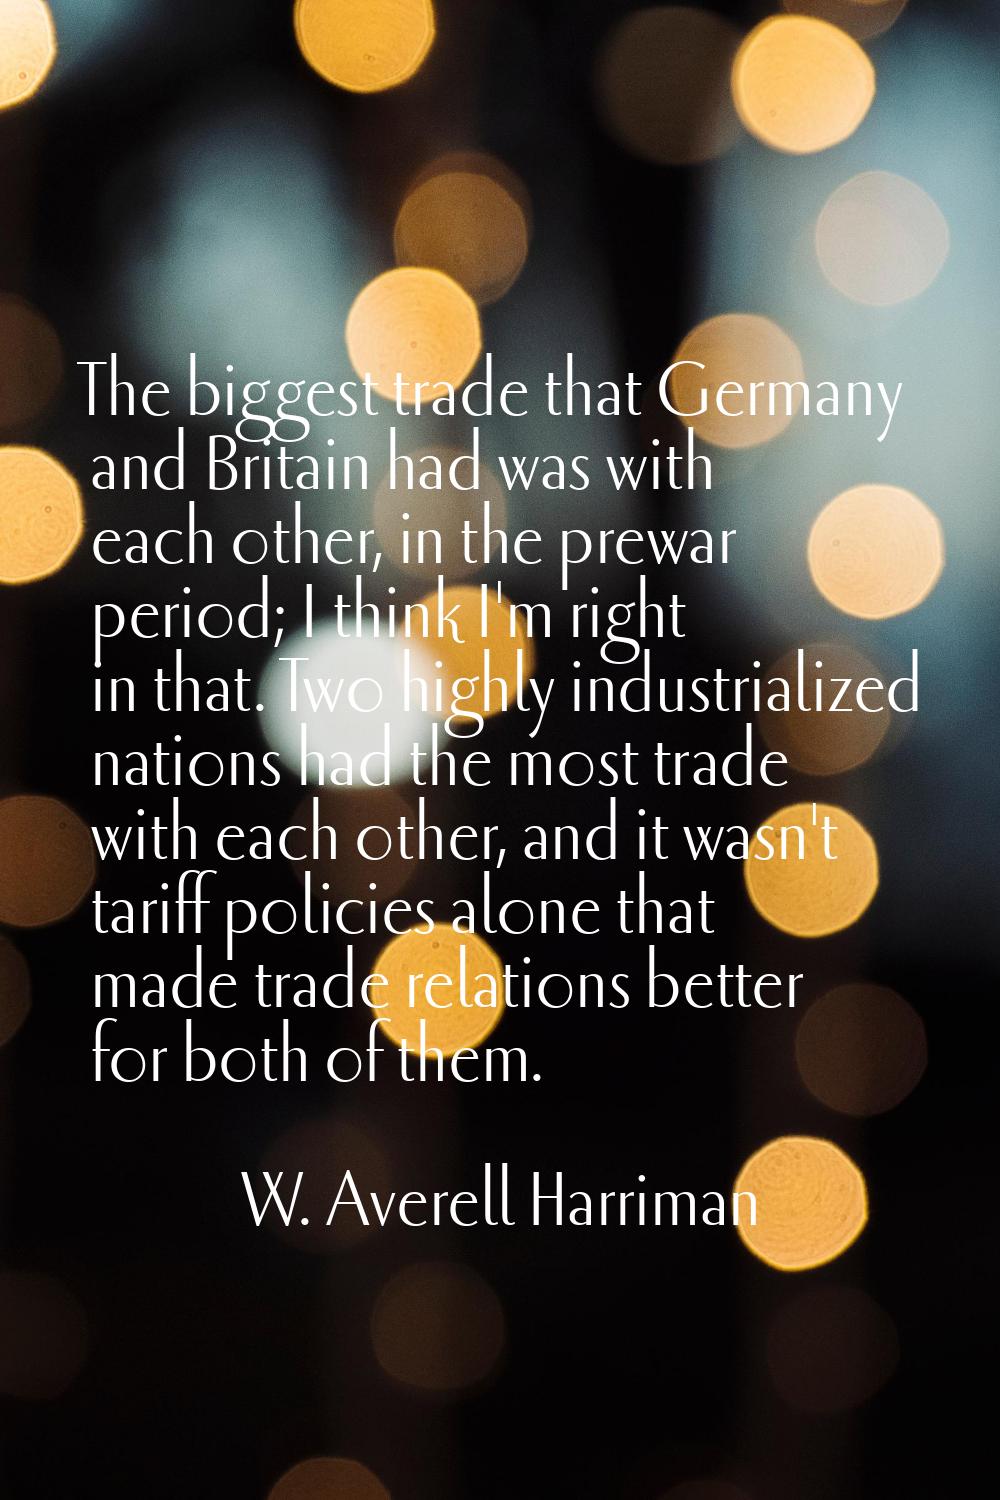 The biggest trade that Germany and Britain had was with each other, in the prewar period; I think I